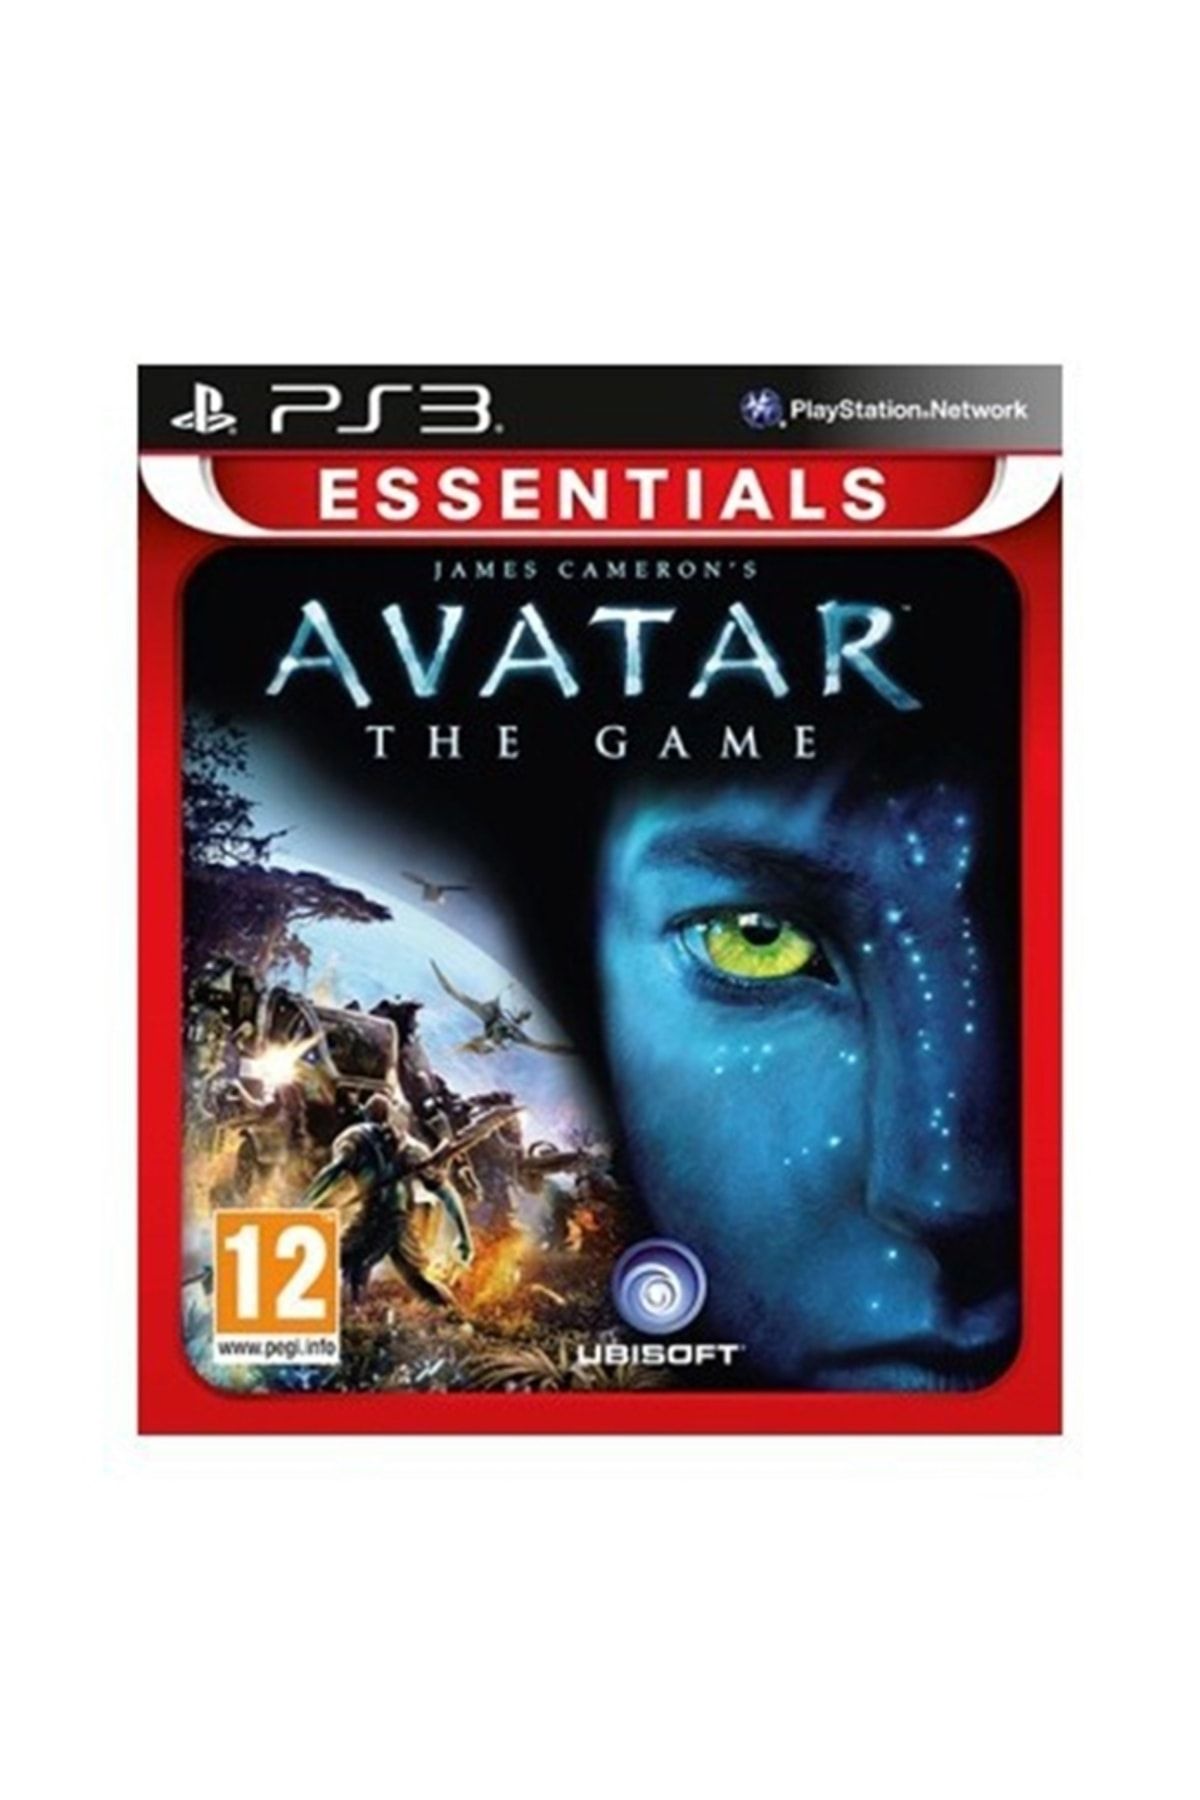 Игра на пс аватар. Avatar James Cameron's ps3. James Cameron's avatar: the game ps3. James Cameron's avatar: the game ps3 обложка. Диск ps3 аватар.